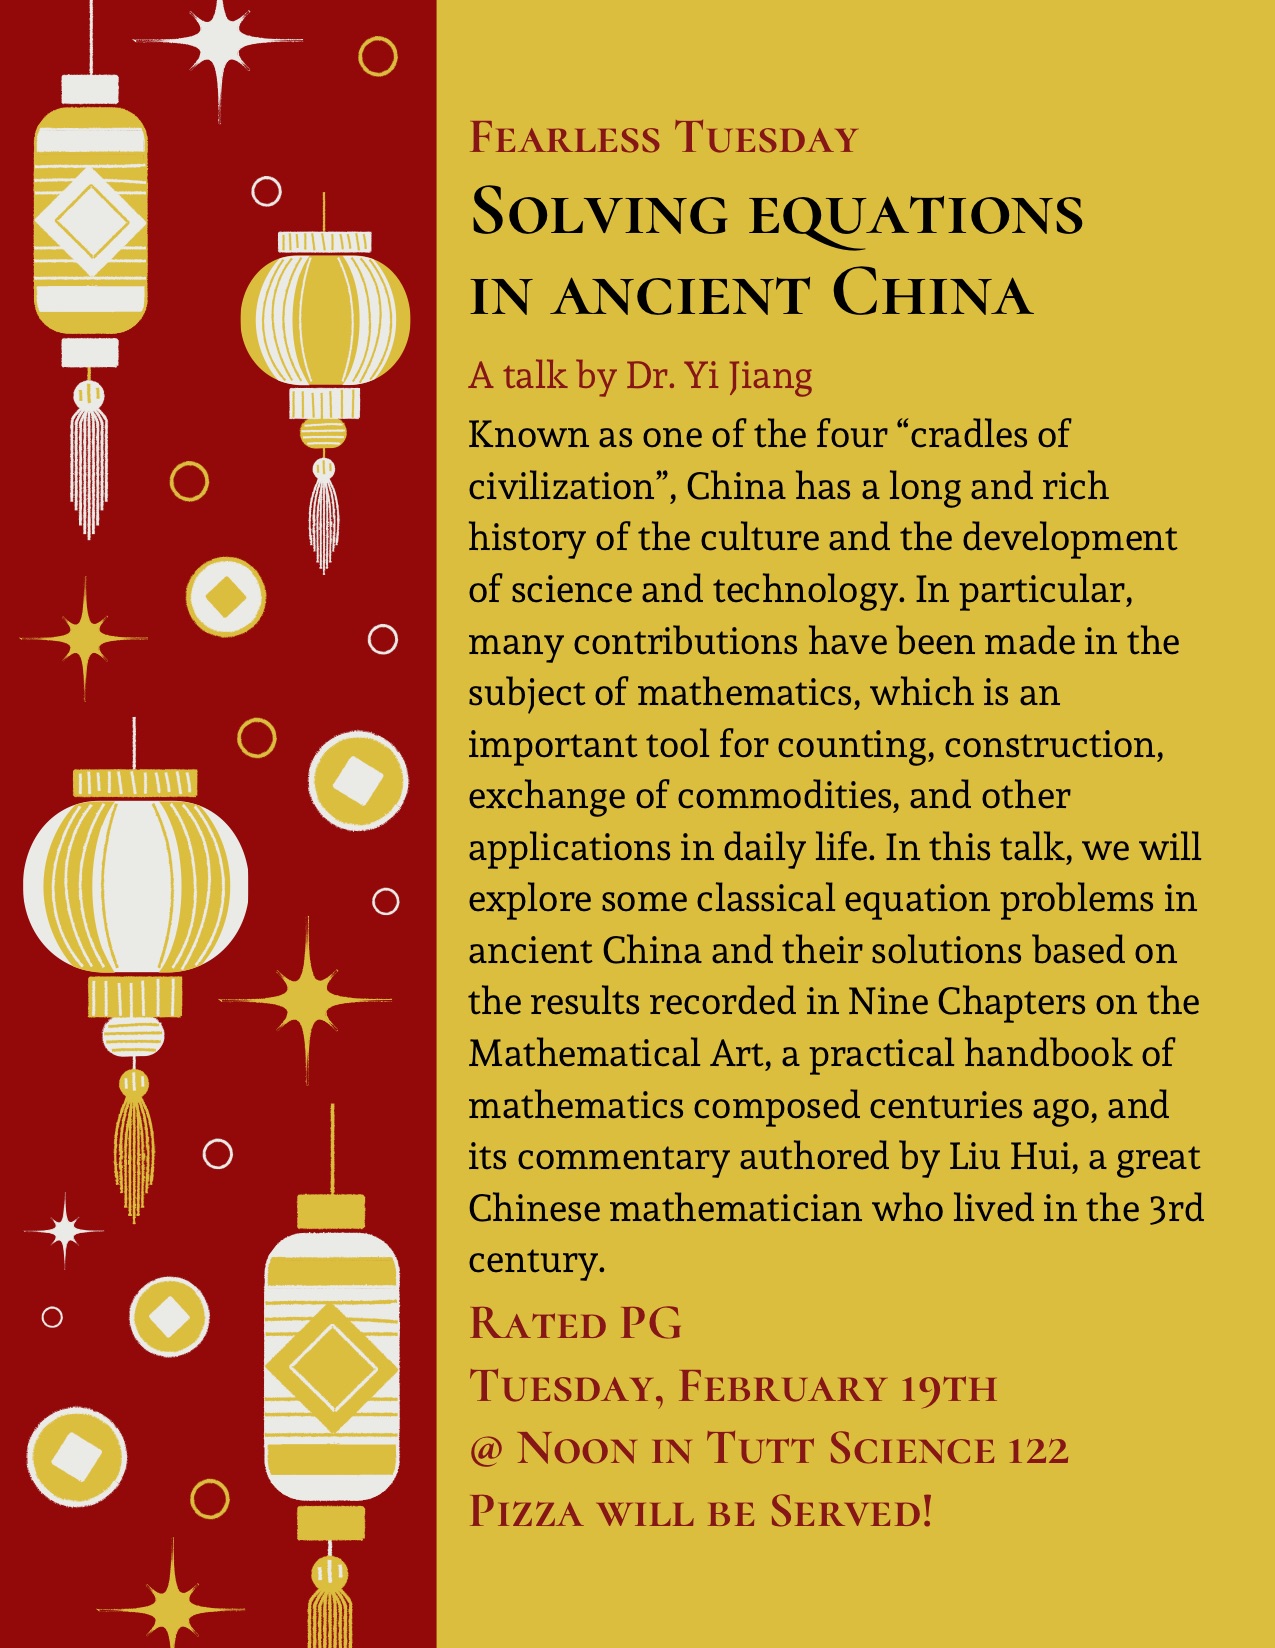 Feb 19 - Solving Equations in Ancient China